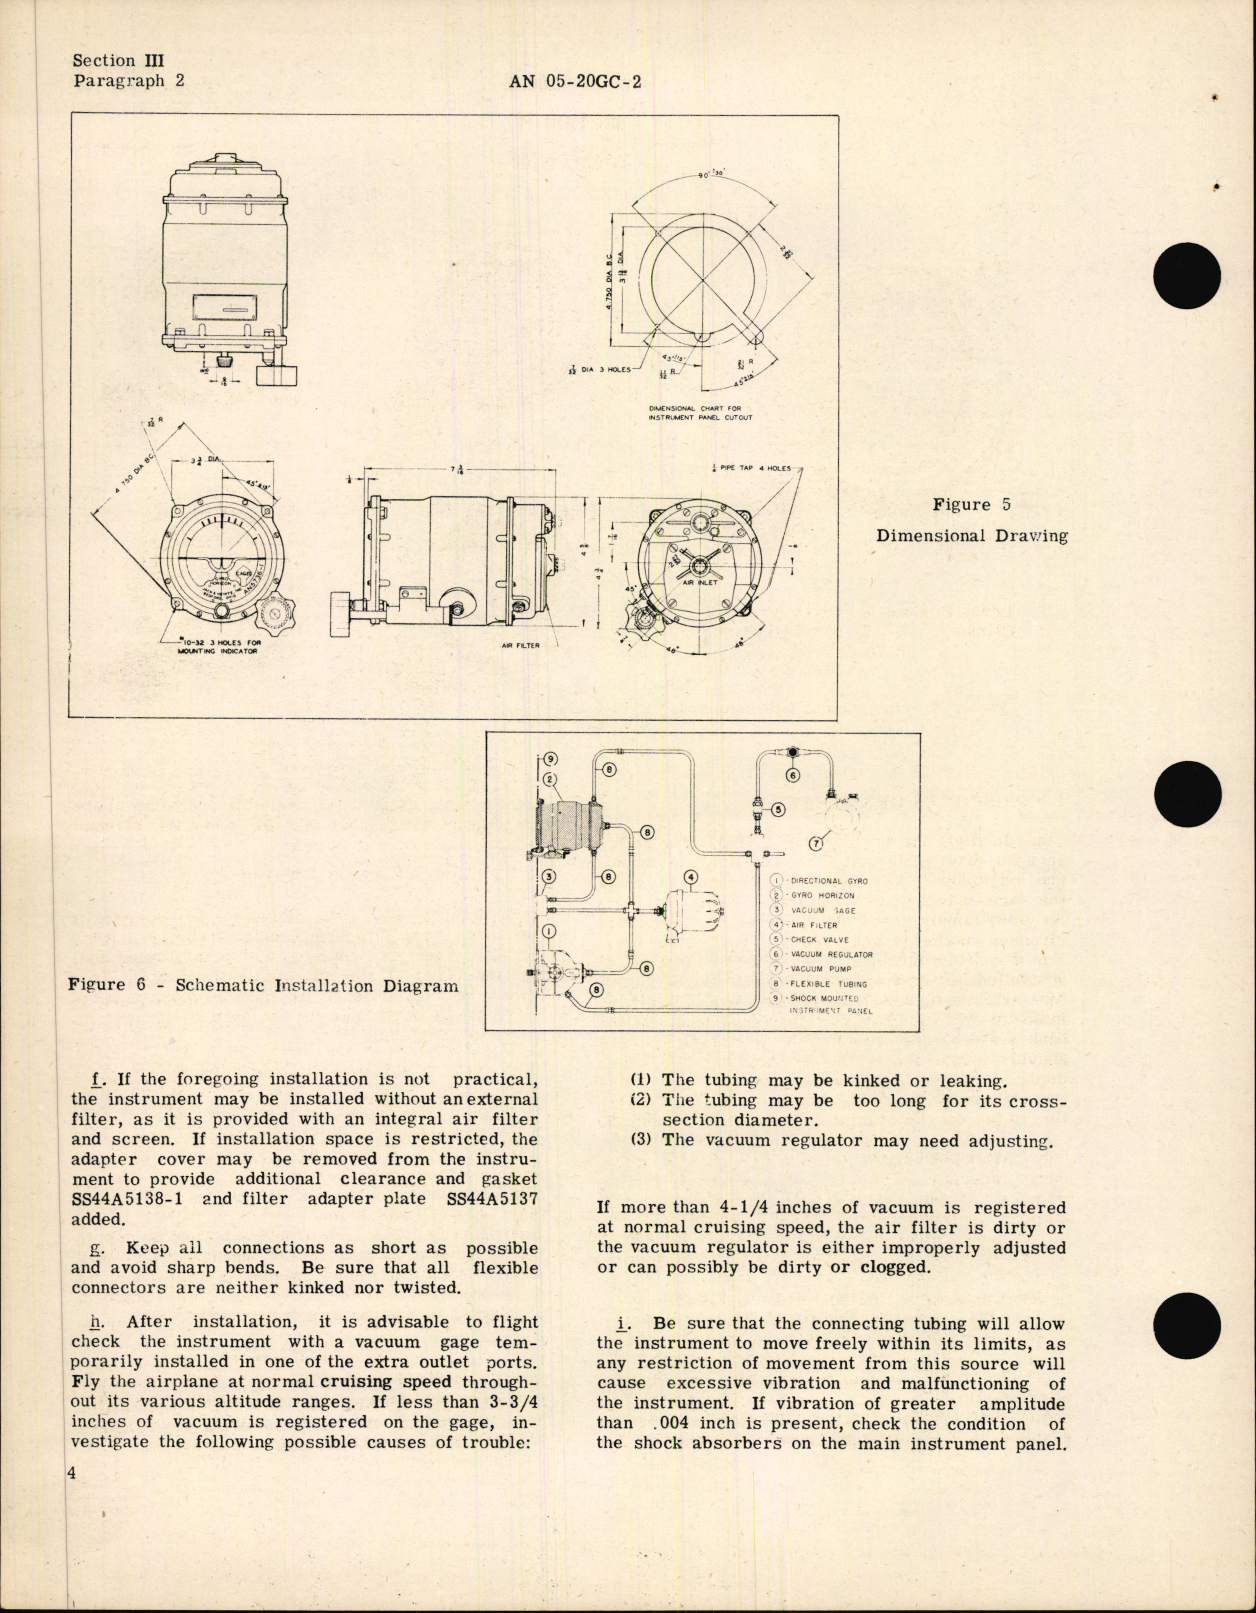 Sample page 8 from AirCorps Library document: Operation, Service, & Overhaul Instructions with Parts Catalog for Type AN 5736-1 F.S.S.C. 88-I-1350 Gyro Horizon Indicator